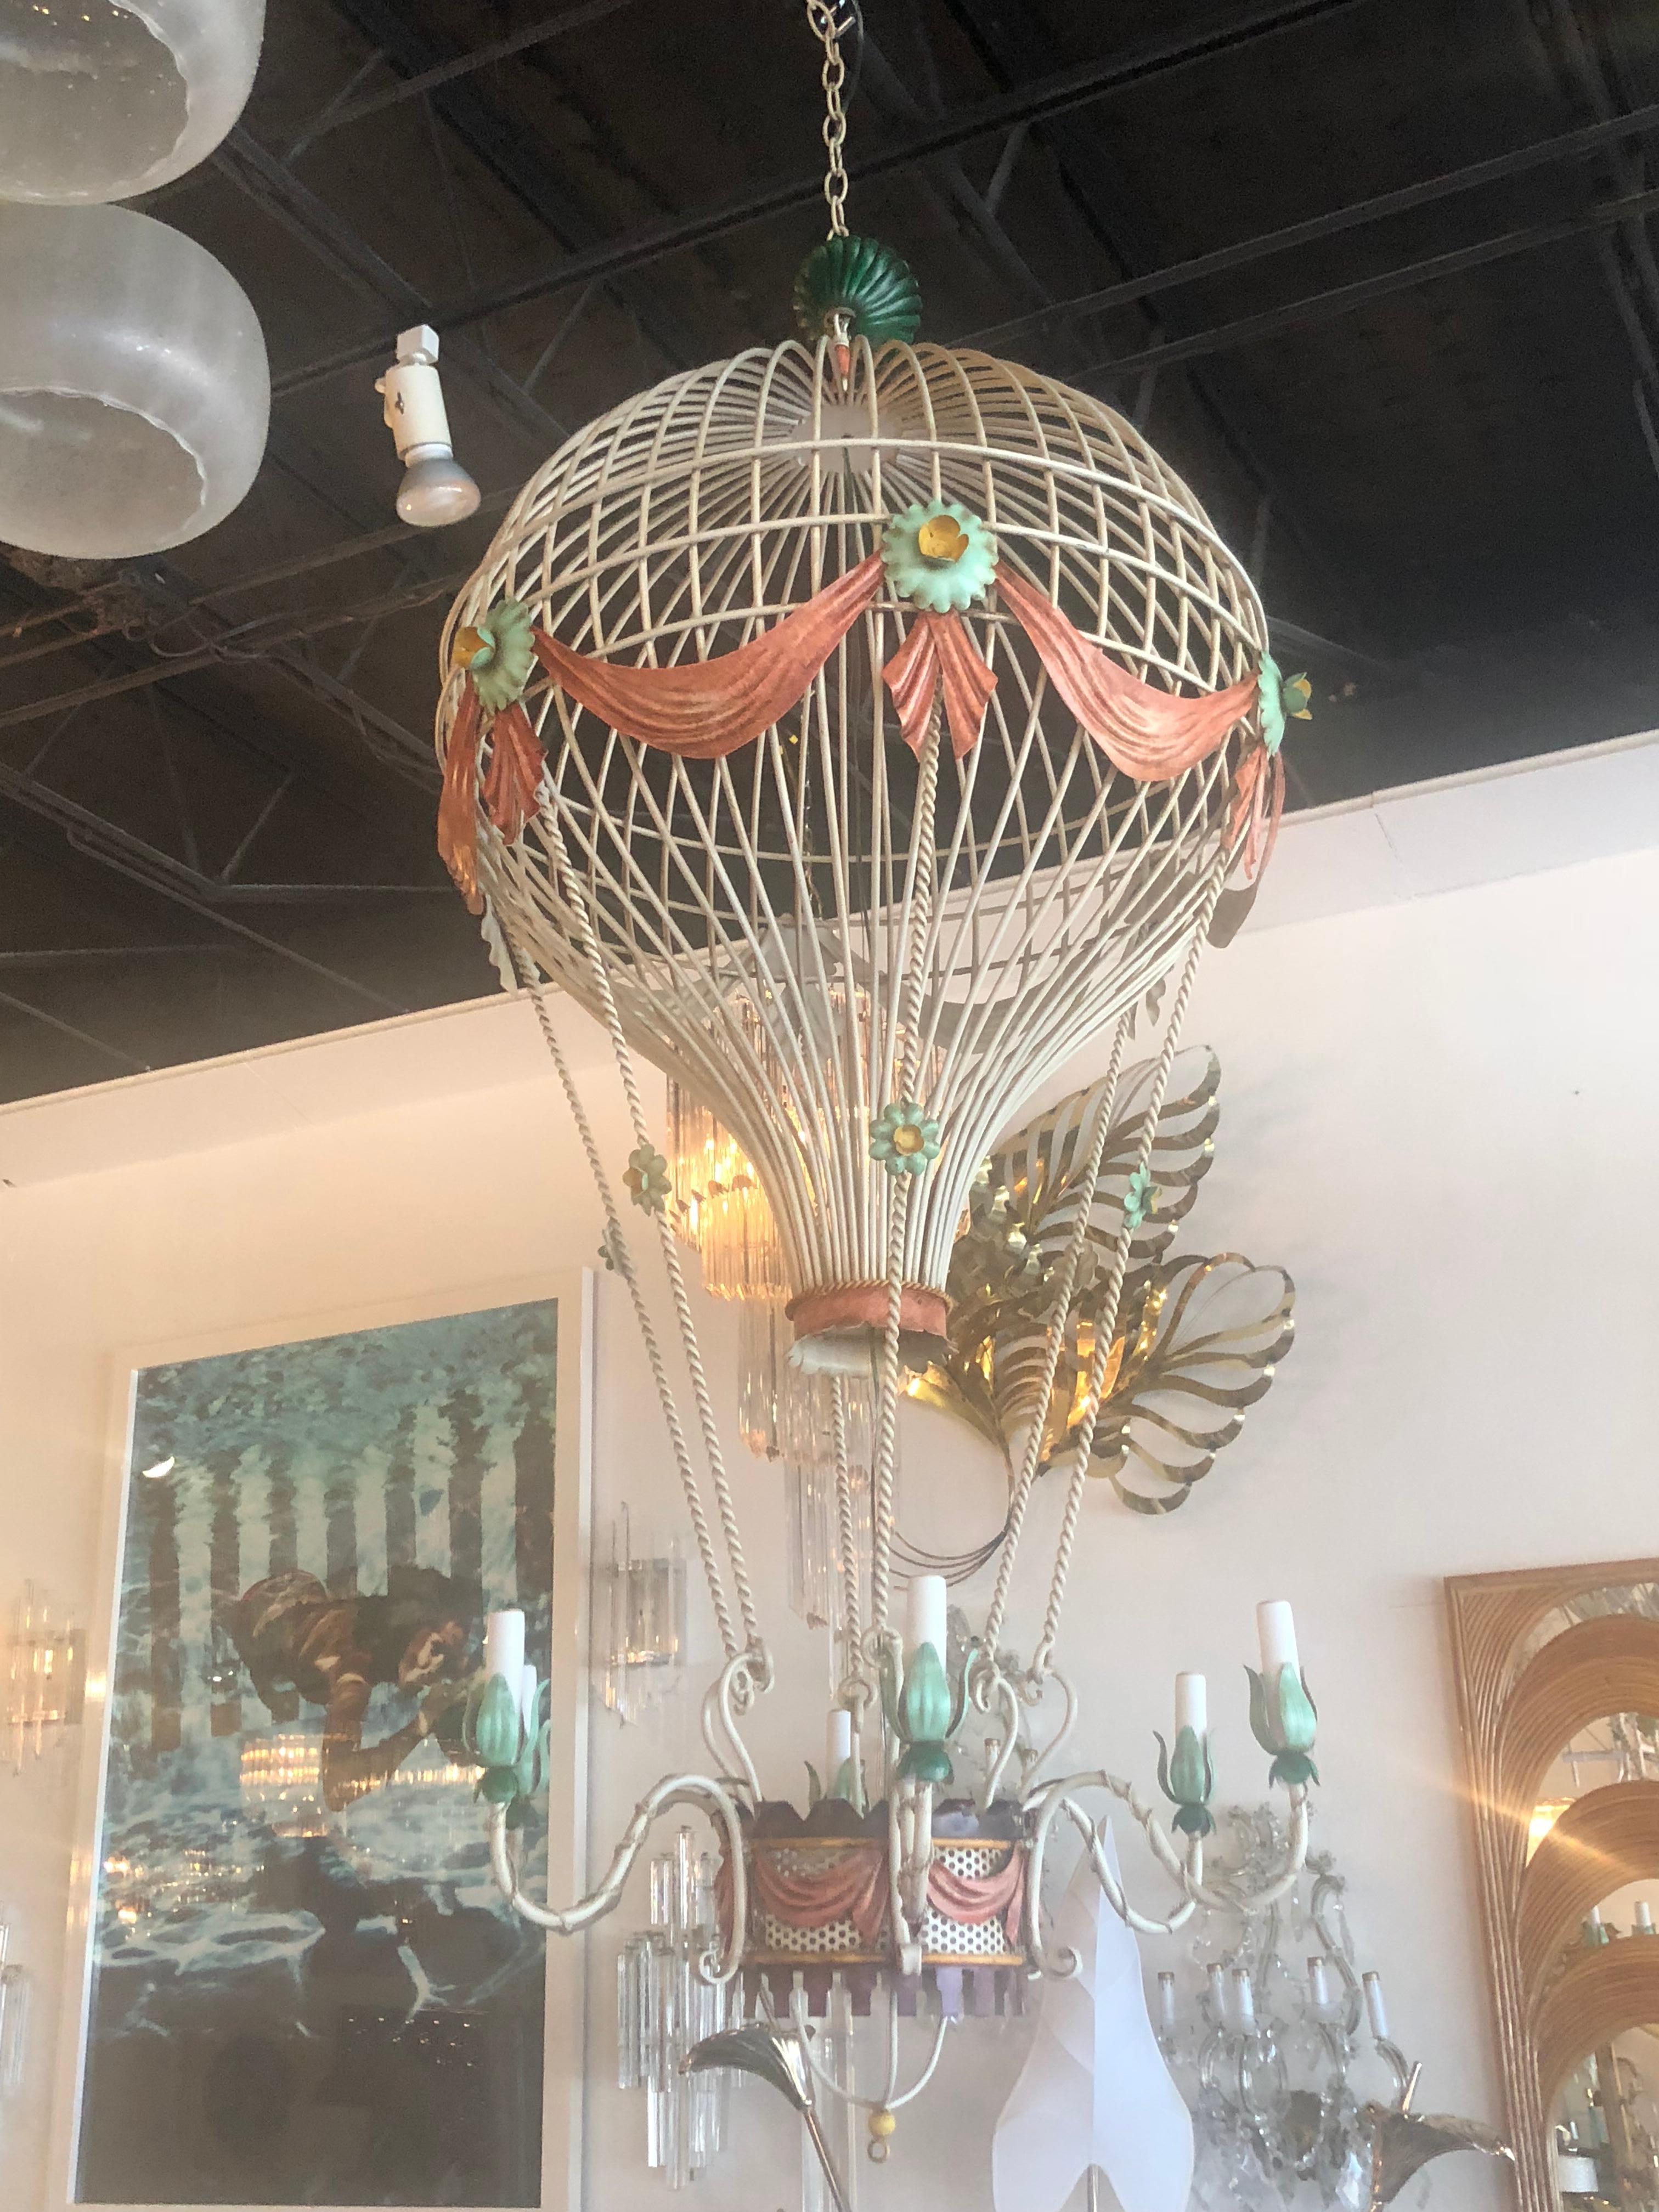 Beautiful vintage 6-light Italian tole metal chandelier. Comes with original chain and ceiling canopy. Lampshades included.
 